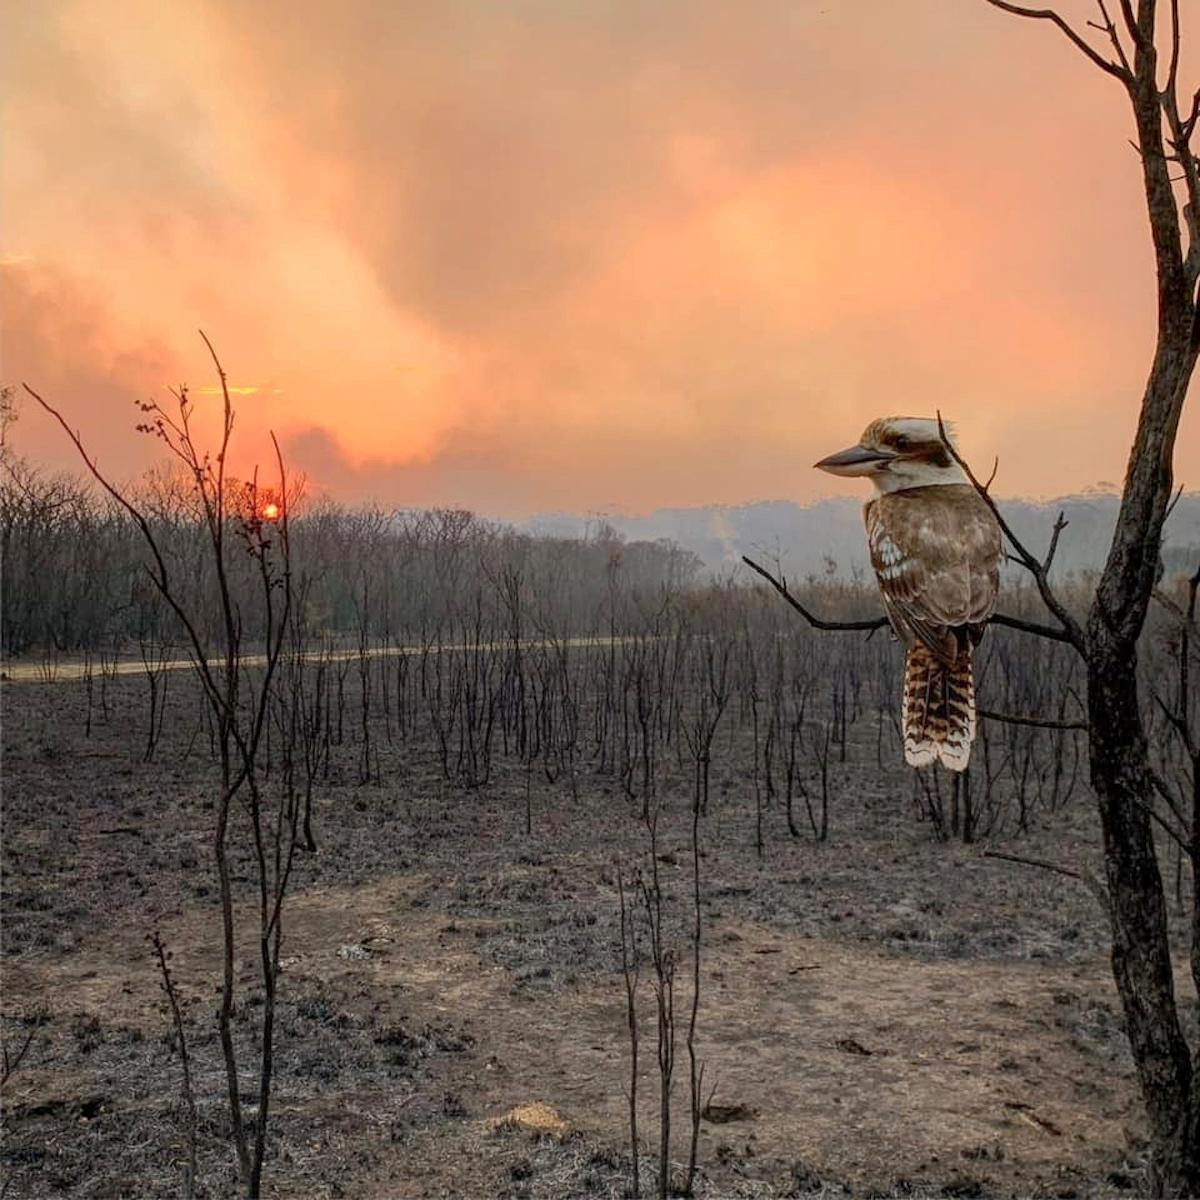 A kookaburra perches on a burnt tree in the aftermath of a bushfire in Wallabi Point, New South Wales, Australia, Nov. 12, 2019, in this image obtained from social media. (Courtesy of Adam Stevenson/Social Media via Reuters)